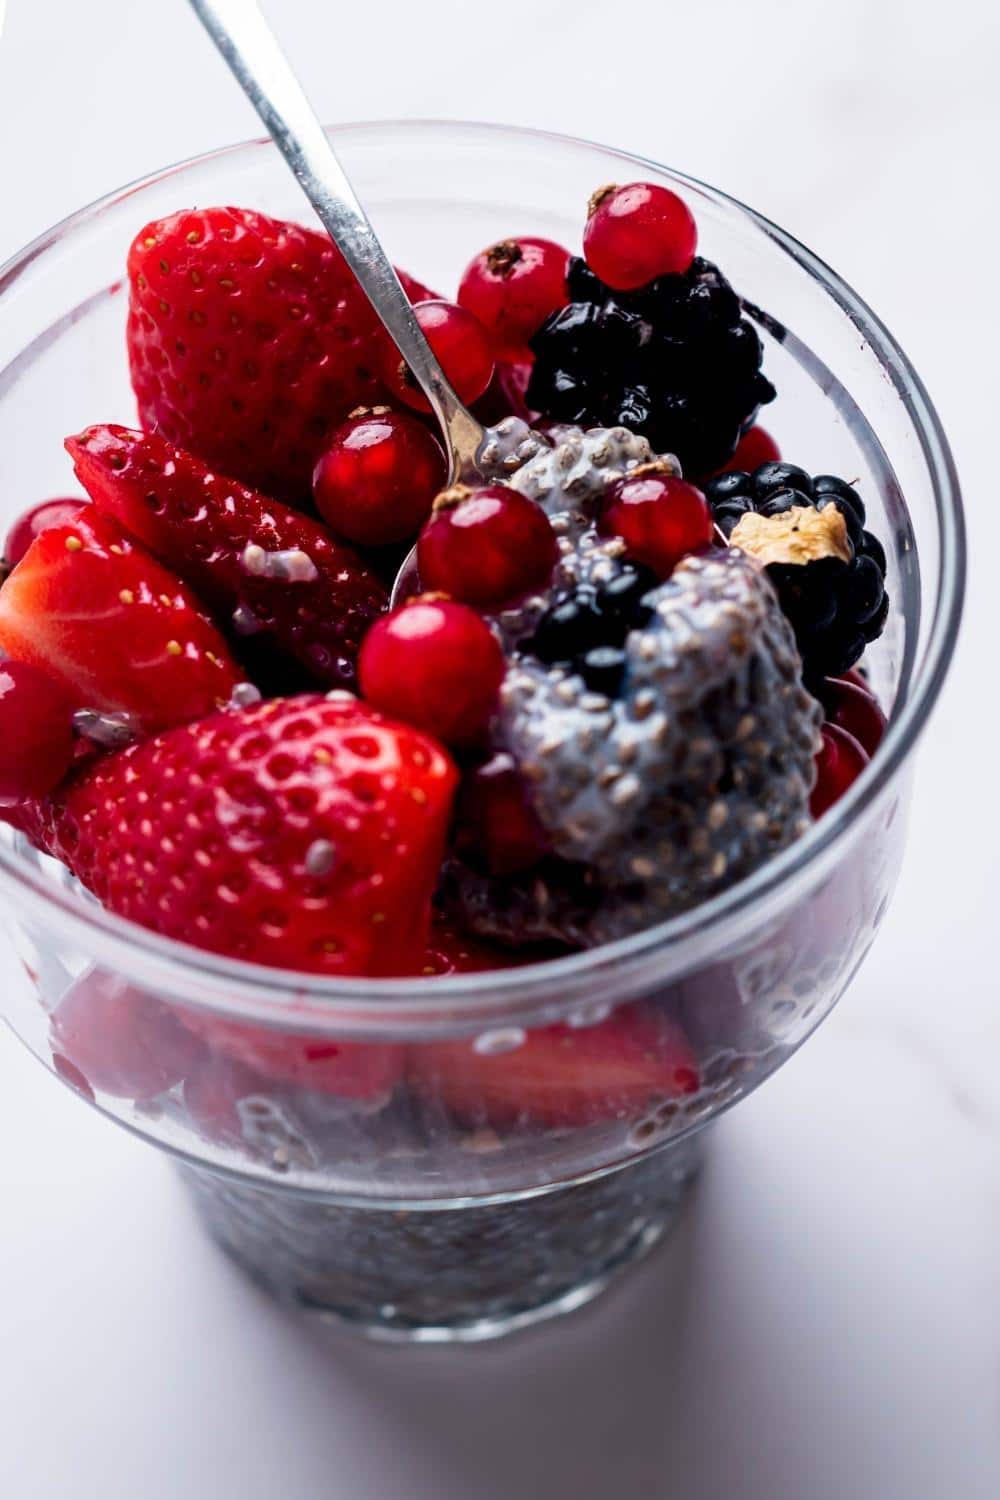 A spoon with some Chia seed putting in it with blackberries, strawberries, and cherries on top.